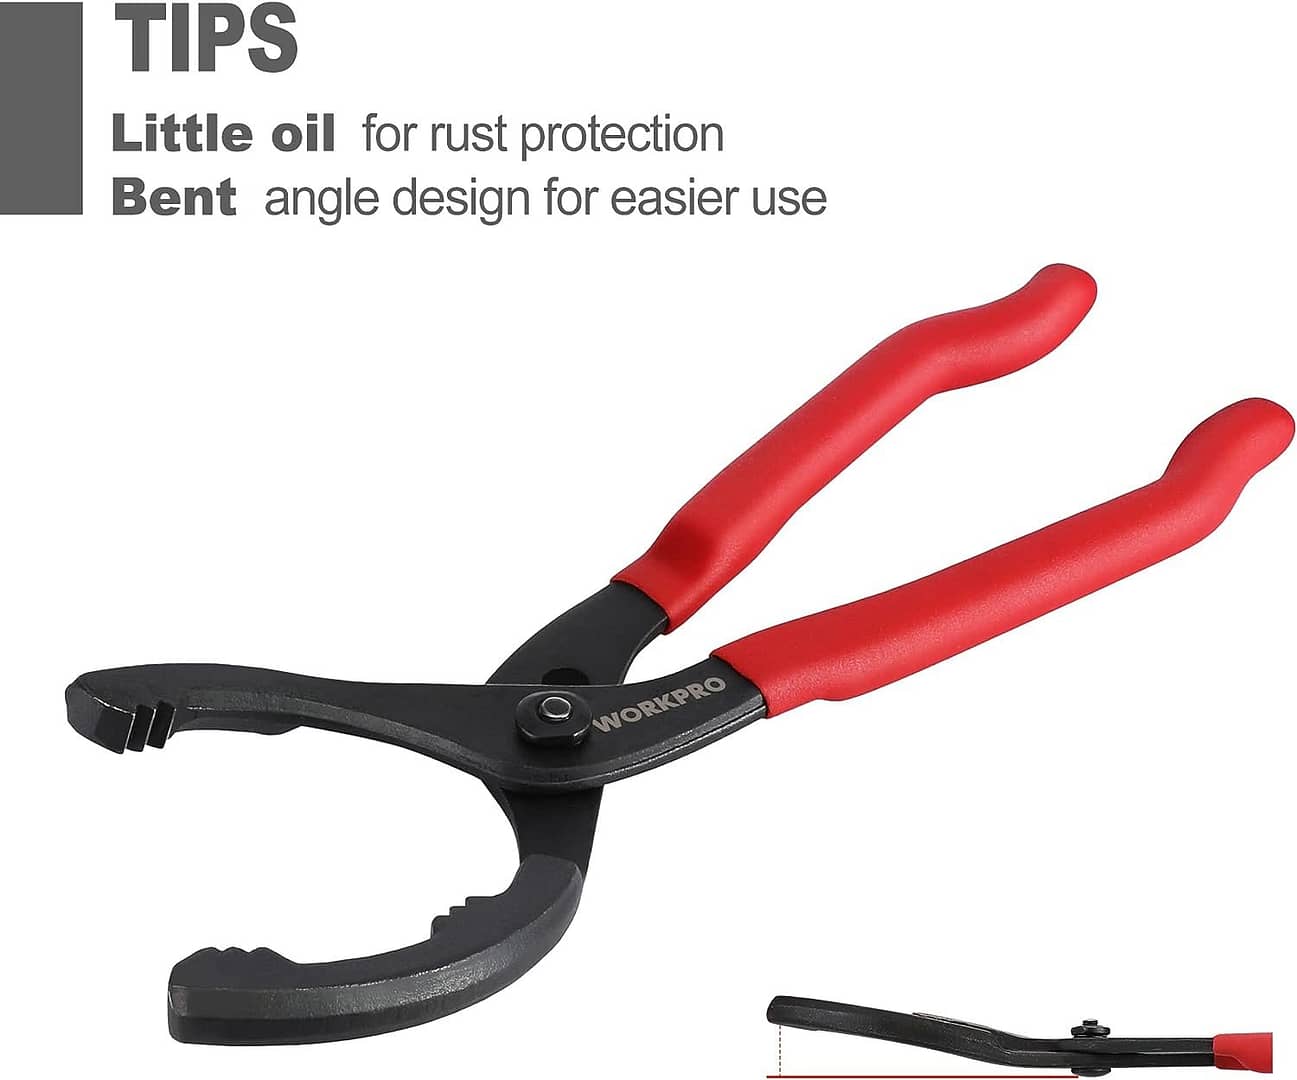 workpro 12 adjustable oil filter pliers review